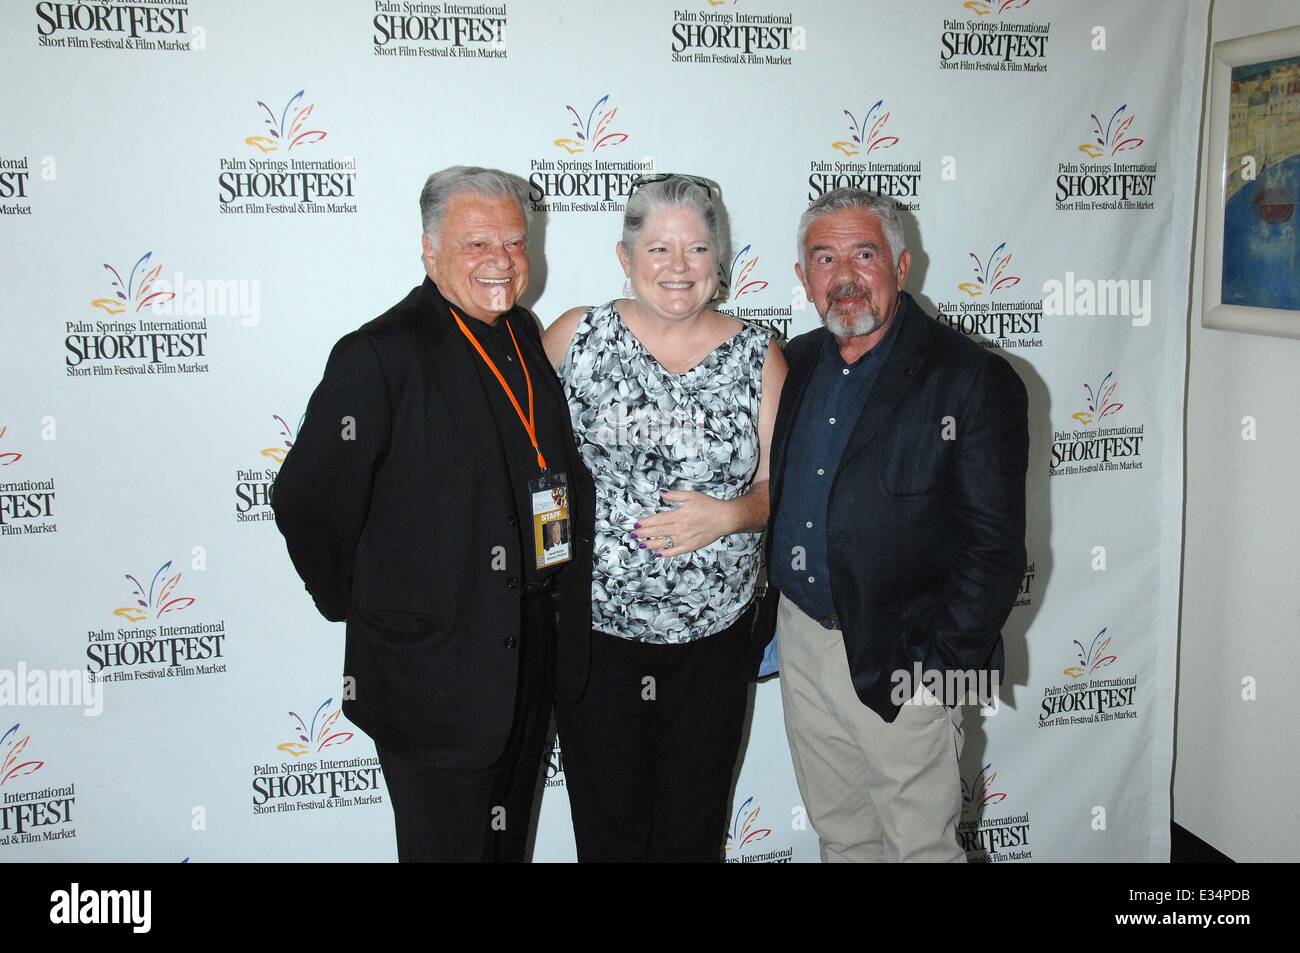 2013 Palm Springs International ShortFest opening night at the Camelot Theatre  Featuring: Harold Matzner,Kathleen Mcinnis,Darrly Mcdonald Where: Palm Springs, CA, United States When: 19 Jun 2013 Stock Photo